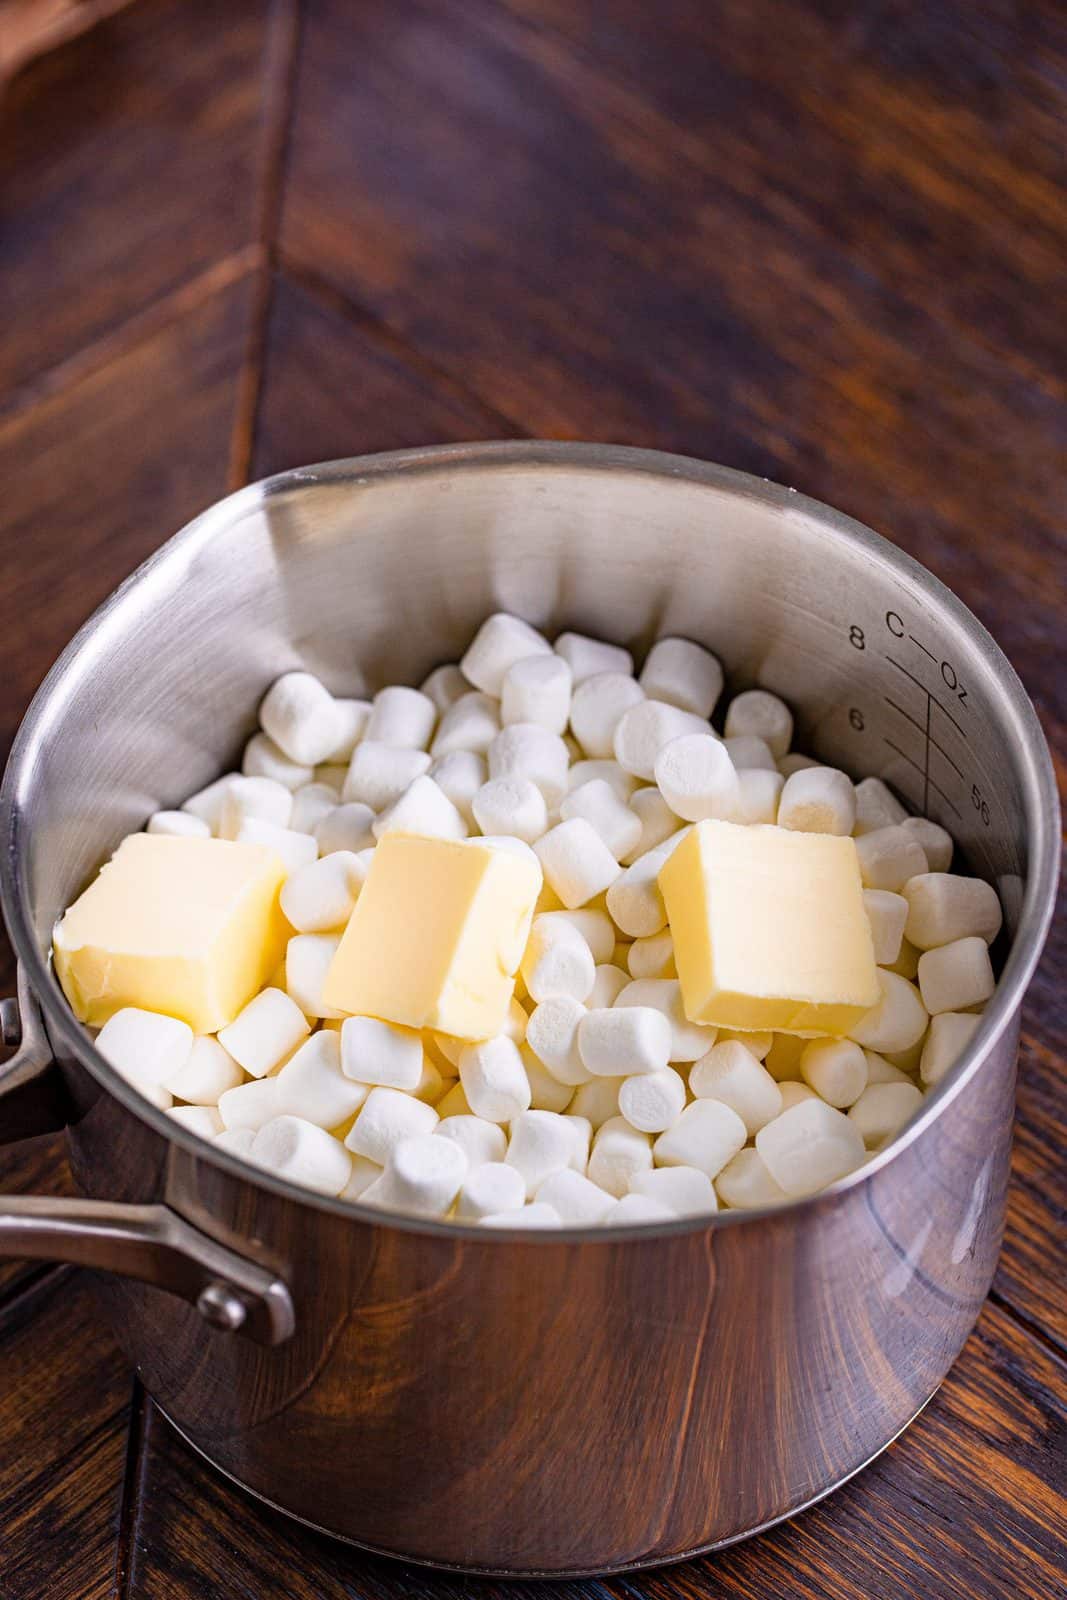 mini marshmallows and pats of butter shown in a saucepan.